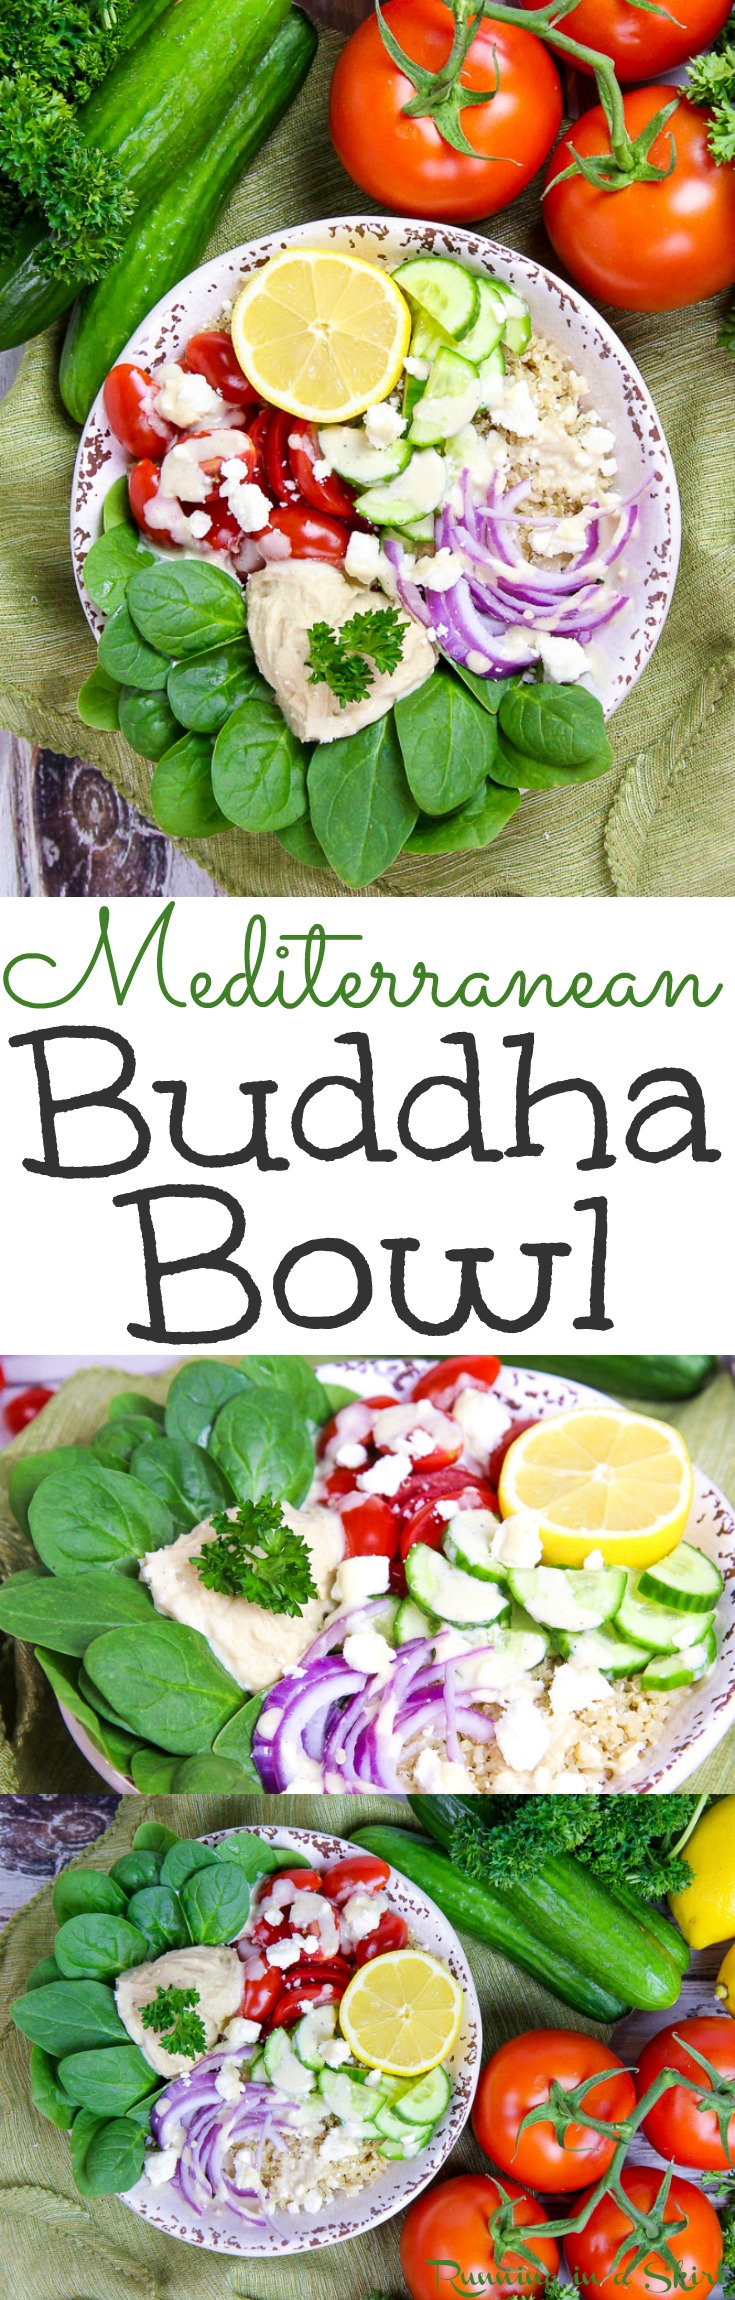 Healthy Mediterranean Buddha Bowl recipe with Lemon Tahini Dressing. Looking for easy plant based healthy recipes for dinner or lunch? Try this power bowl with simple ingredients like quinoa, spinach, hummus and the perfect sauce. Vegetarian, vegan option, gluten free and low carb! / Running in a Skirt via @juliewunder